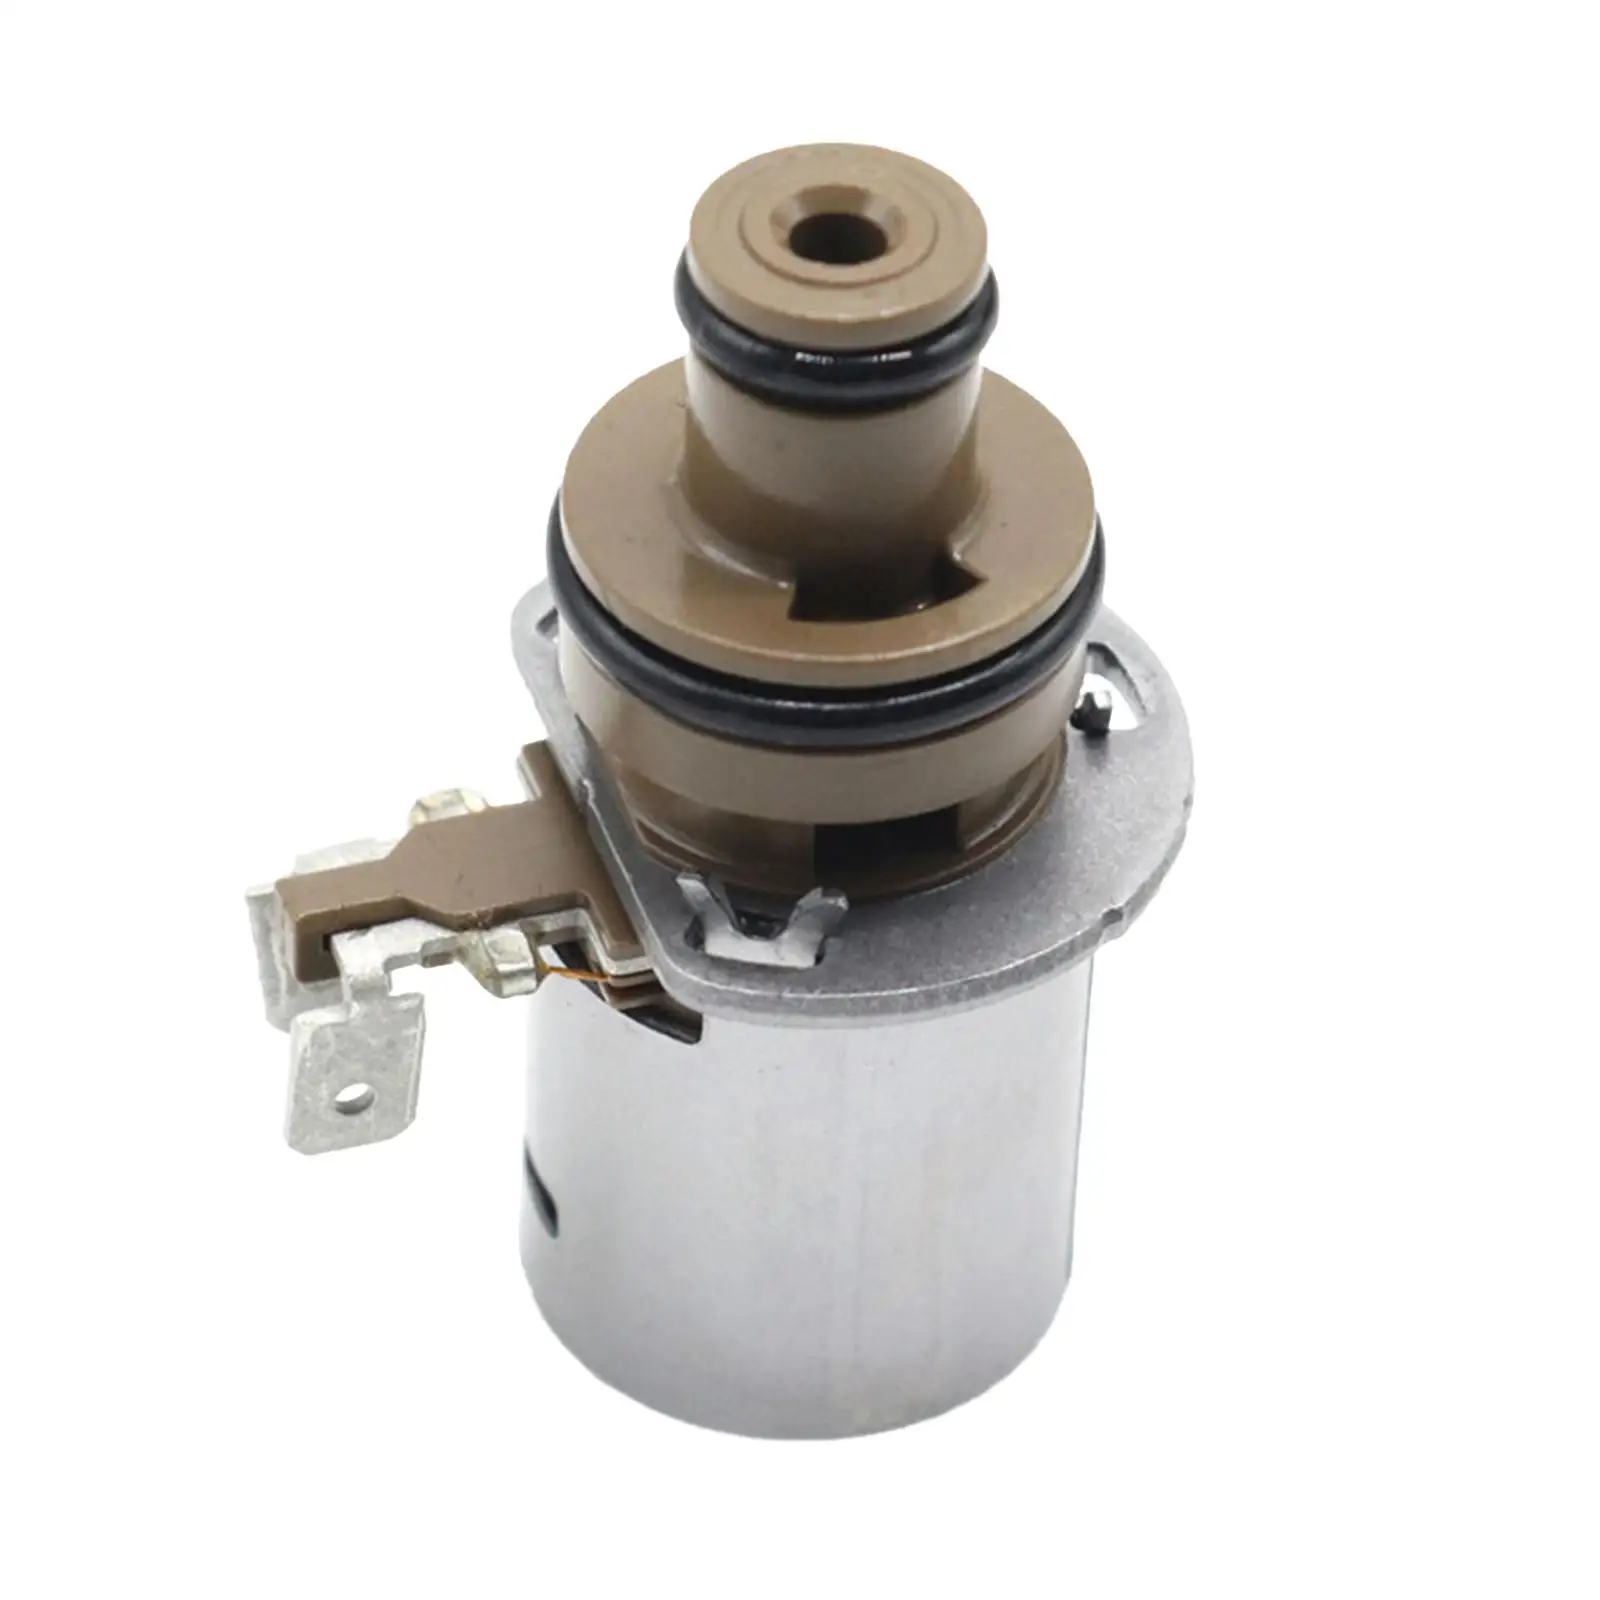  Converter  Solenoid Replaces 31825AA051 31825AA050 Parts 31706AA032 31825AA05 for Cvt TR580 0